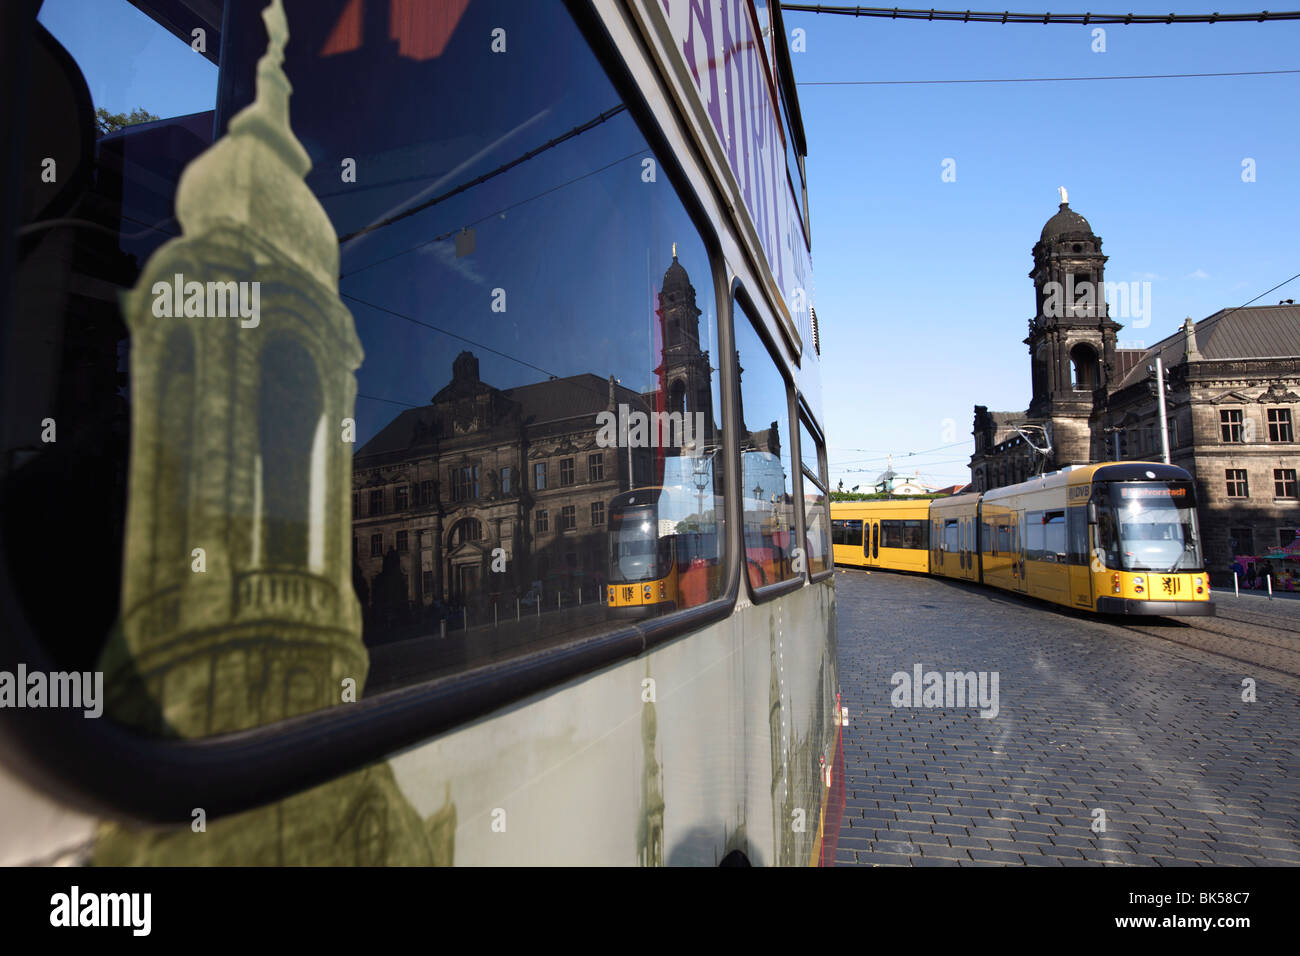 Reflection in bus window, tram on street and Neues Standehaus (New State House), Schlossplatz, Dresden, Saxony, Germany, Europe Stock Photo